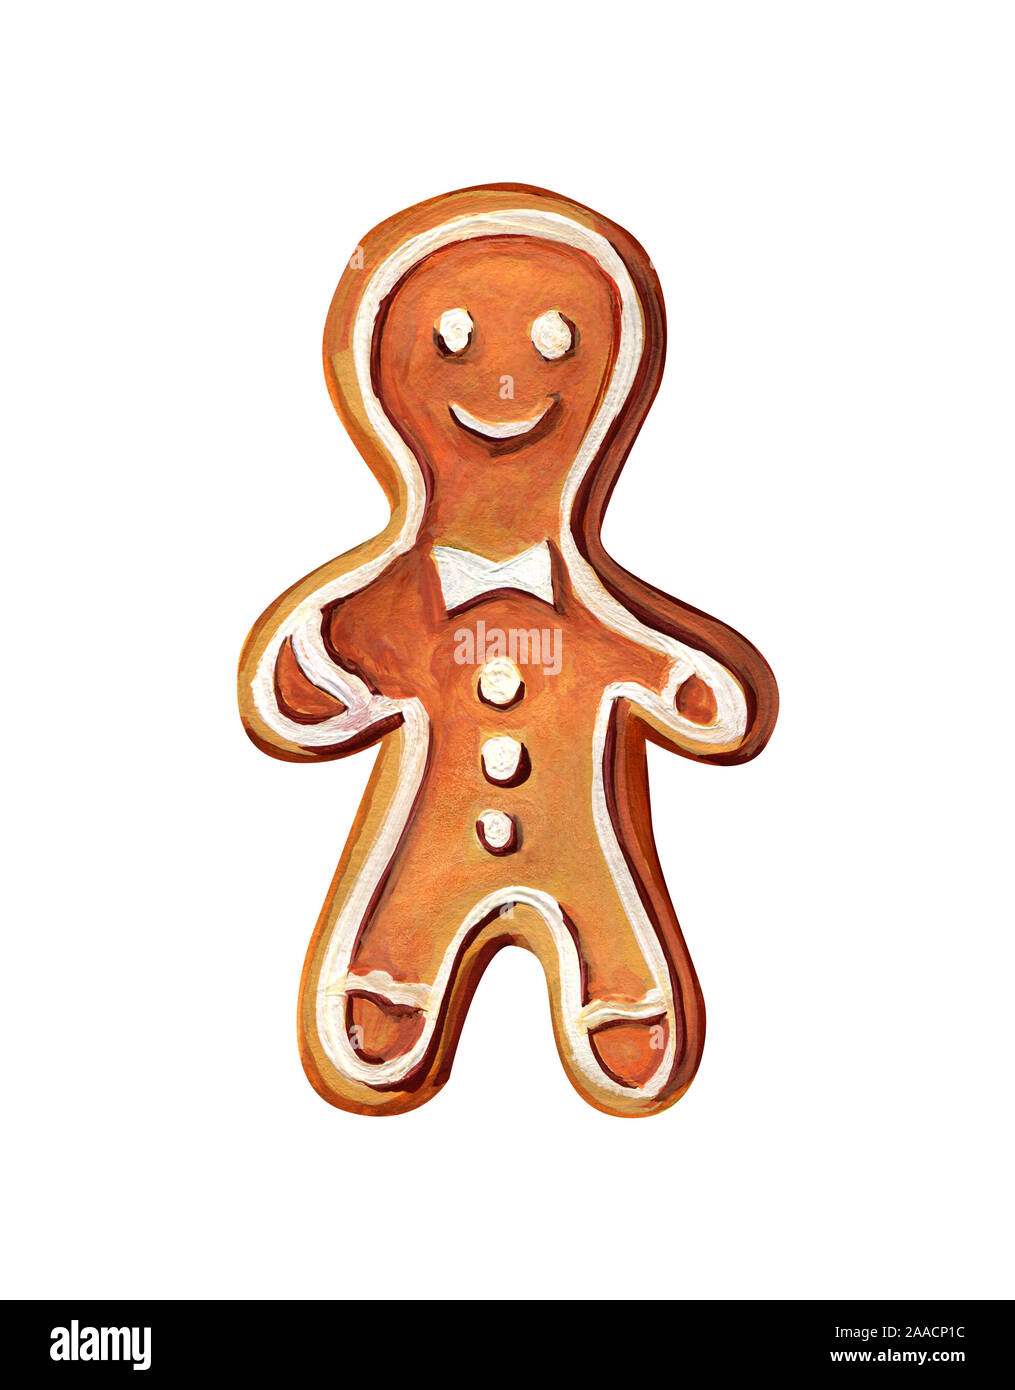 Gingerbread man isolated on a white background. Christmas ginger cookies with white icing. Funny cartoon character. Stock Photo